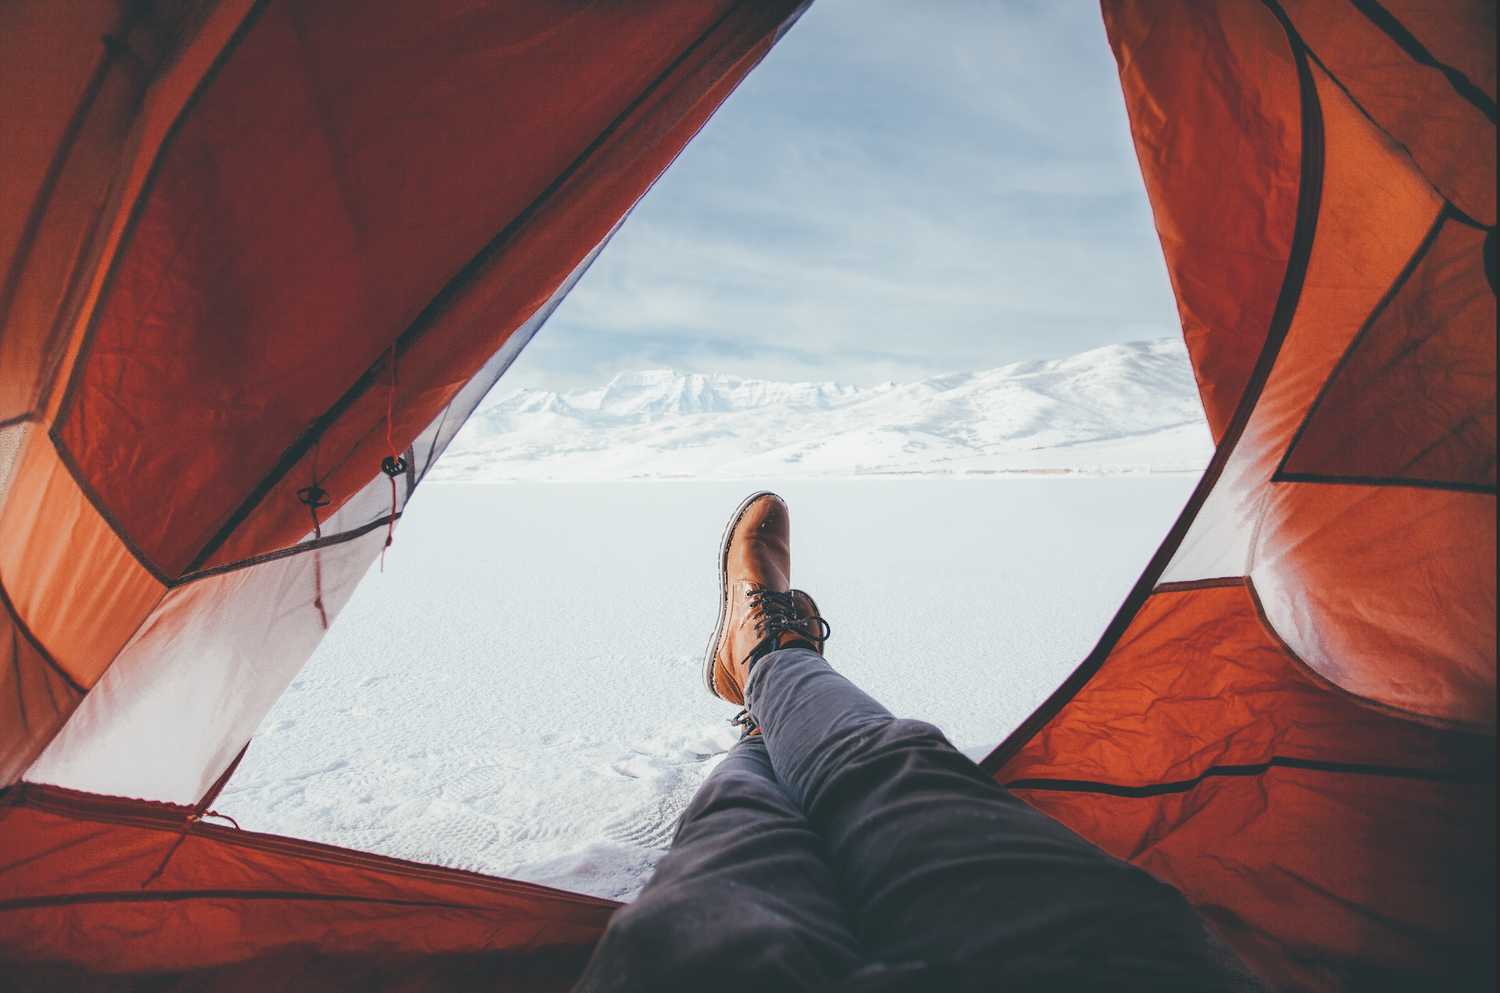 All You Need To Know About Winter Camping In Colorado